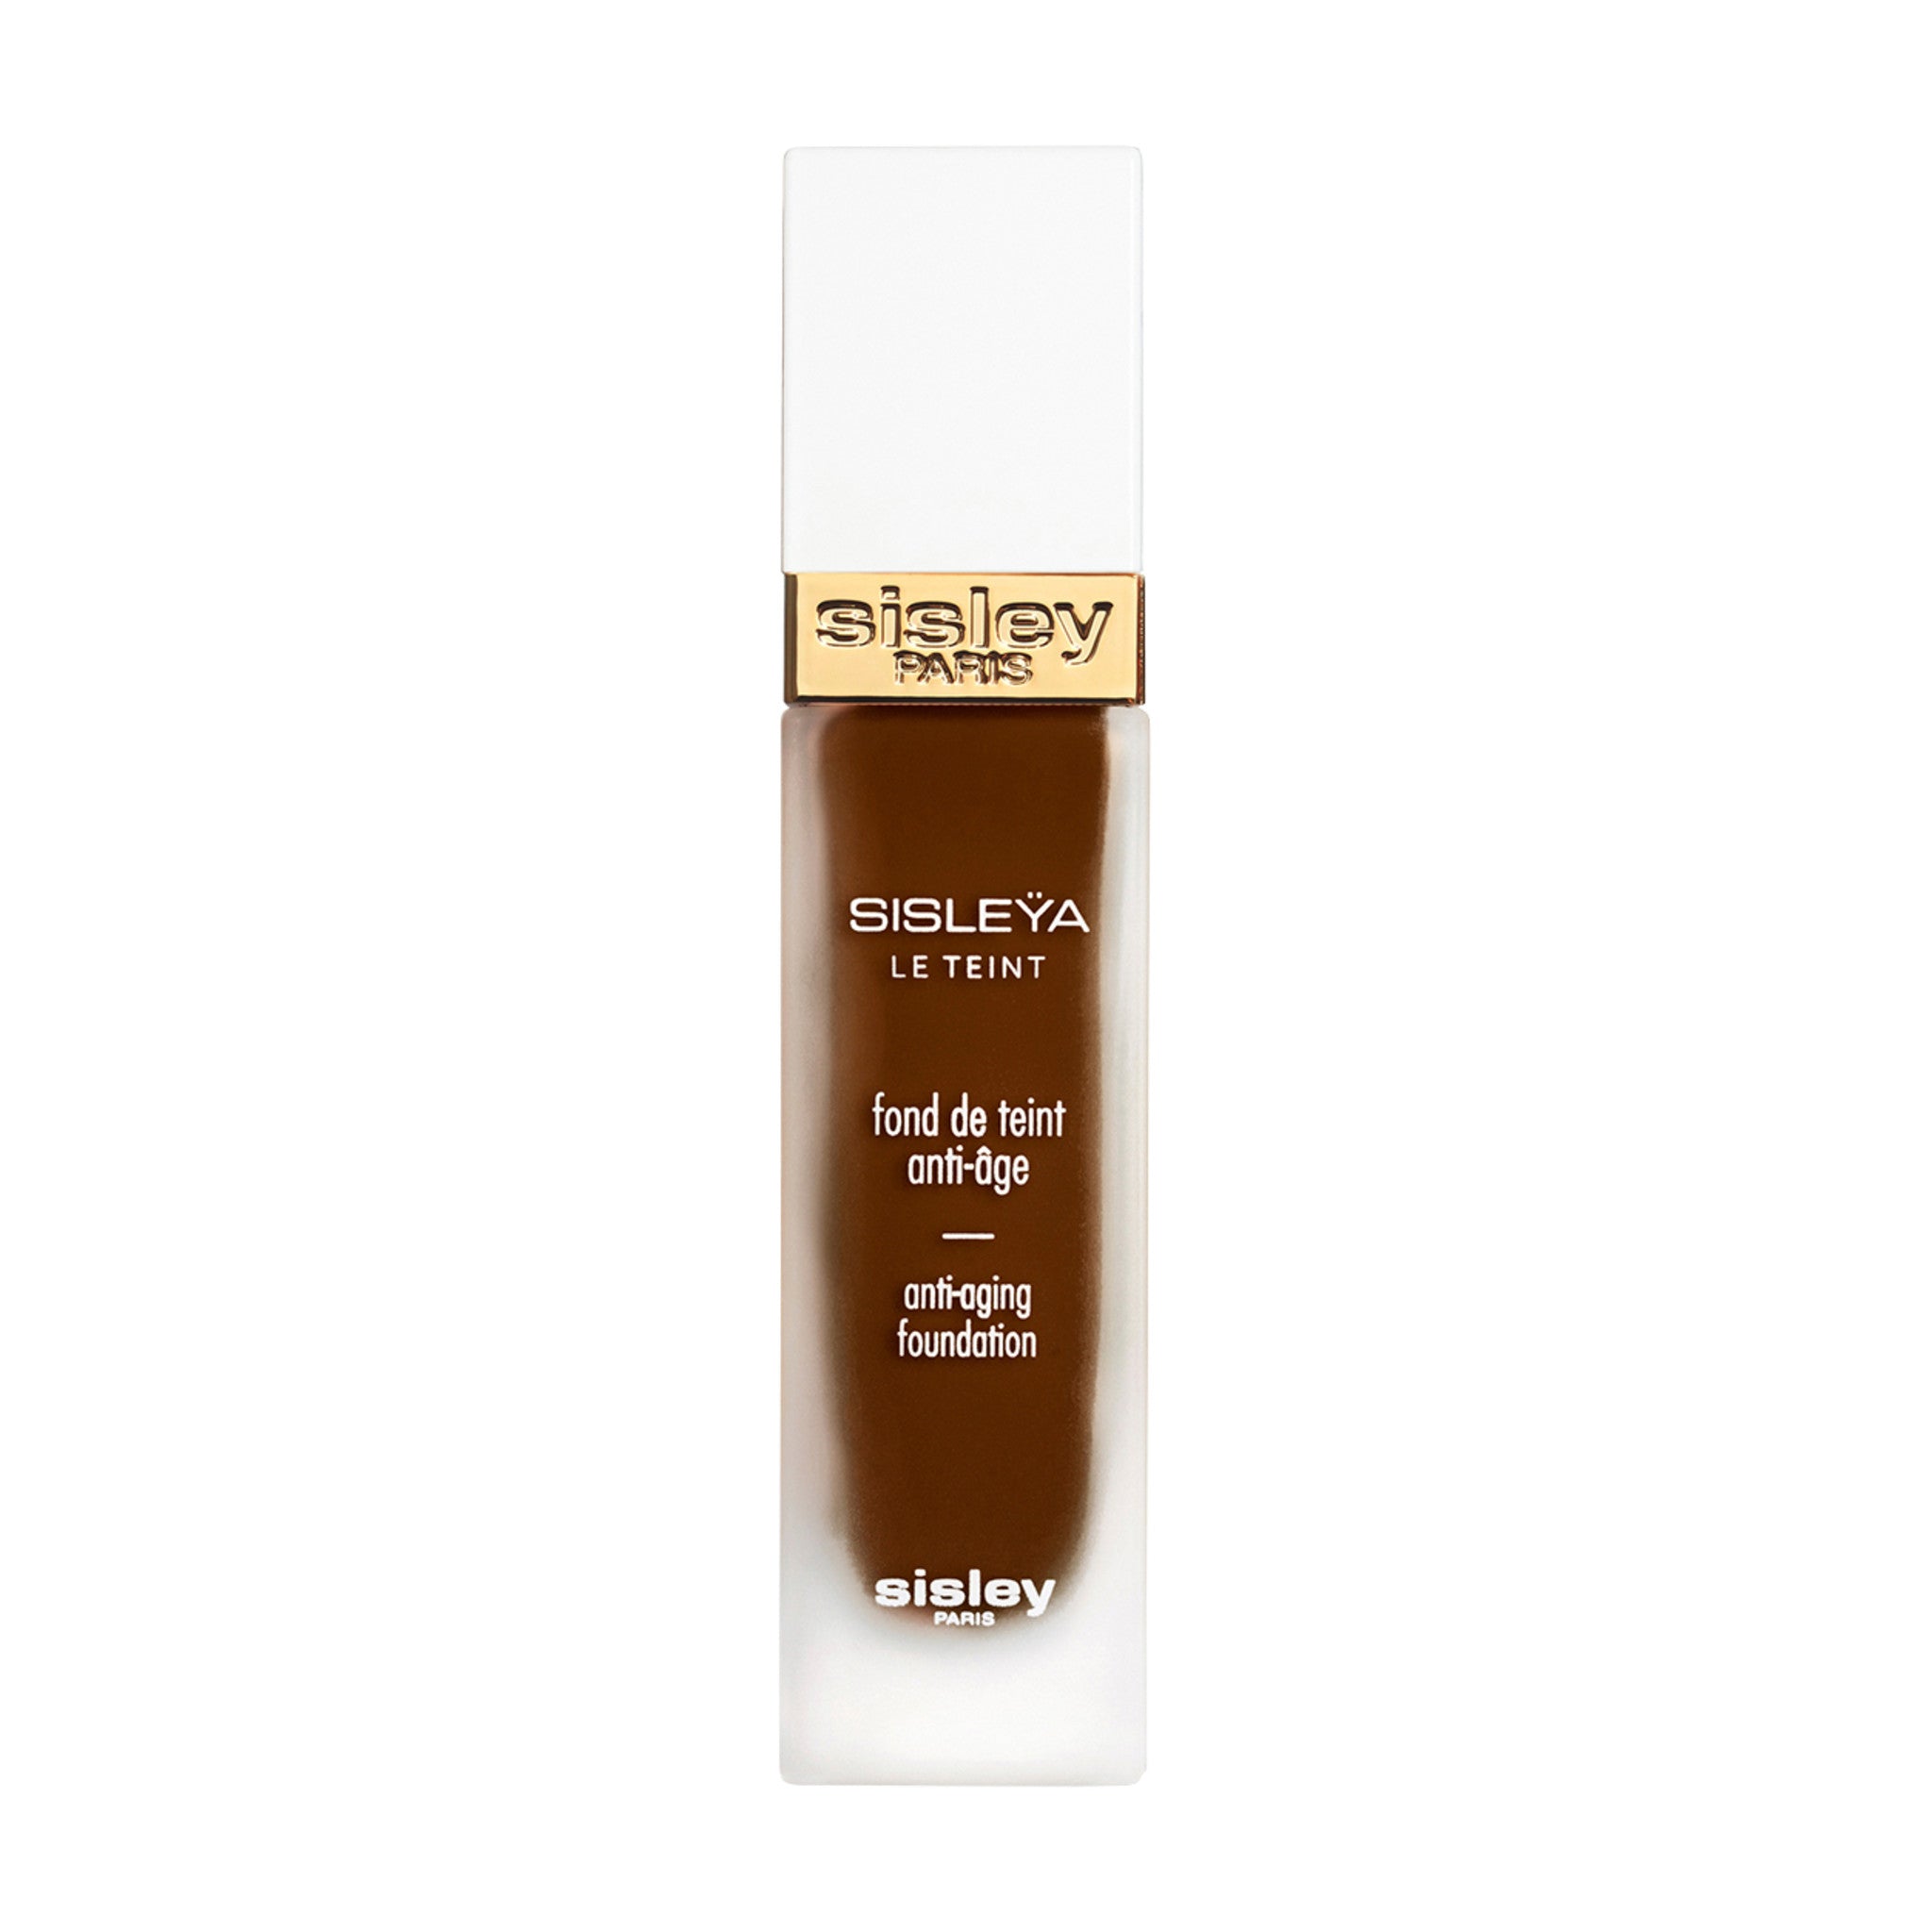 Sisley-Paris Sisleÿa Le Teint Foundation Color/Shade variant: 8C Cappuccino main image. This product is for deep complexions